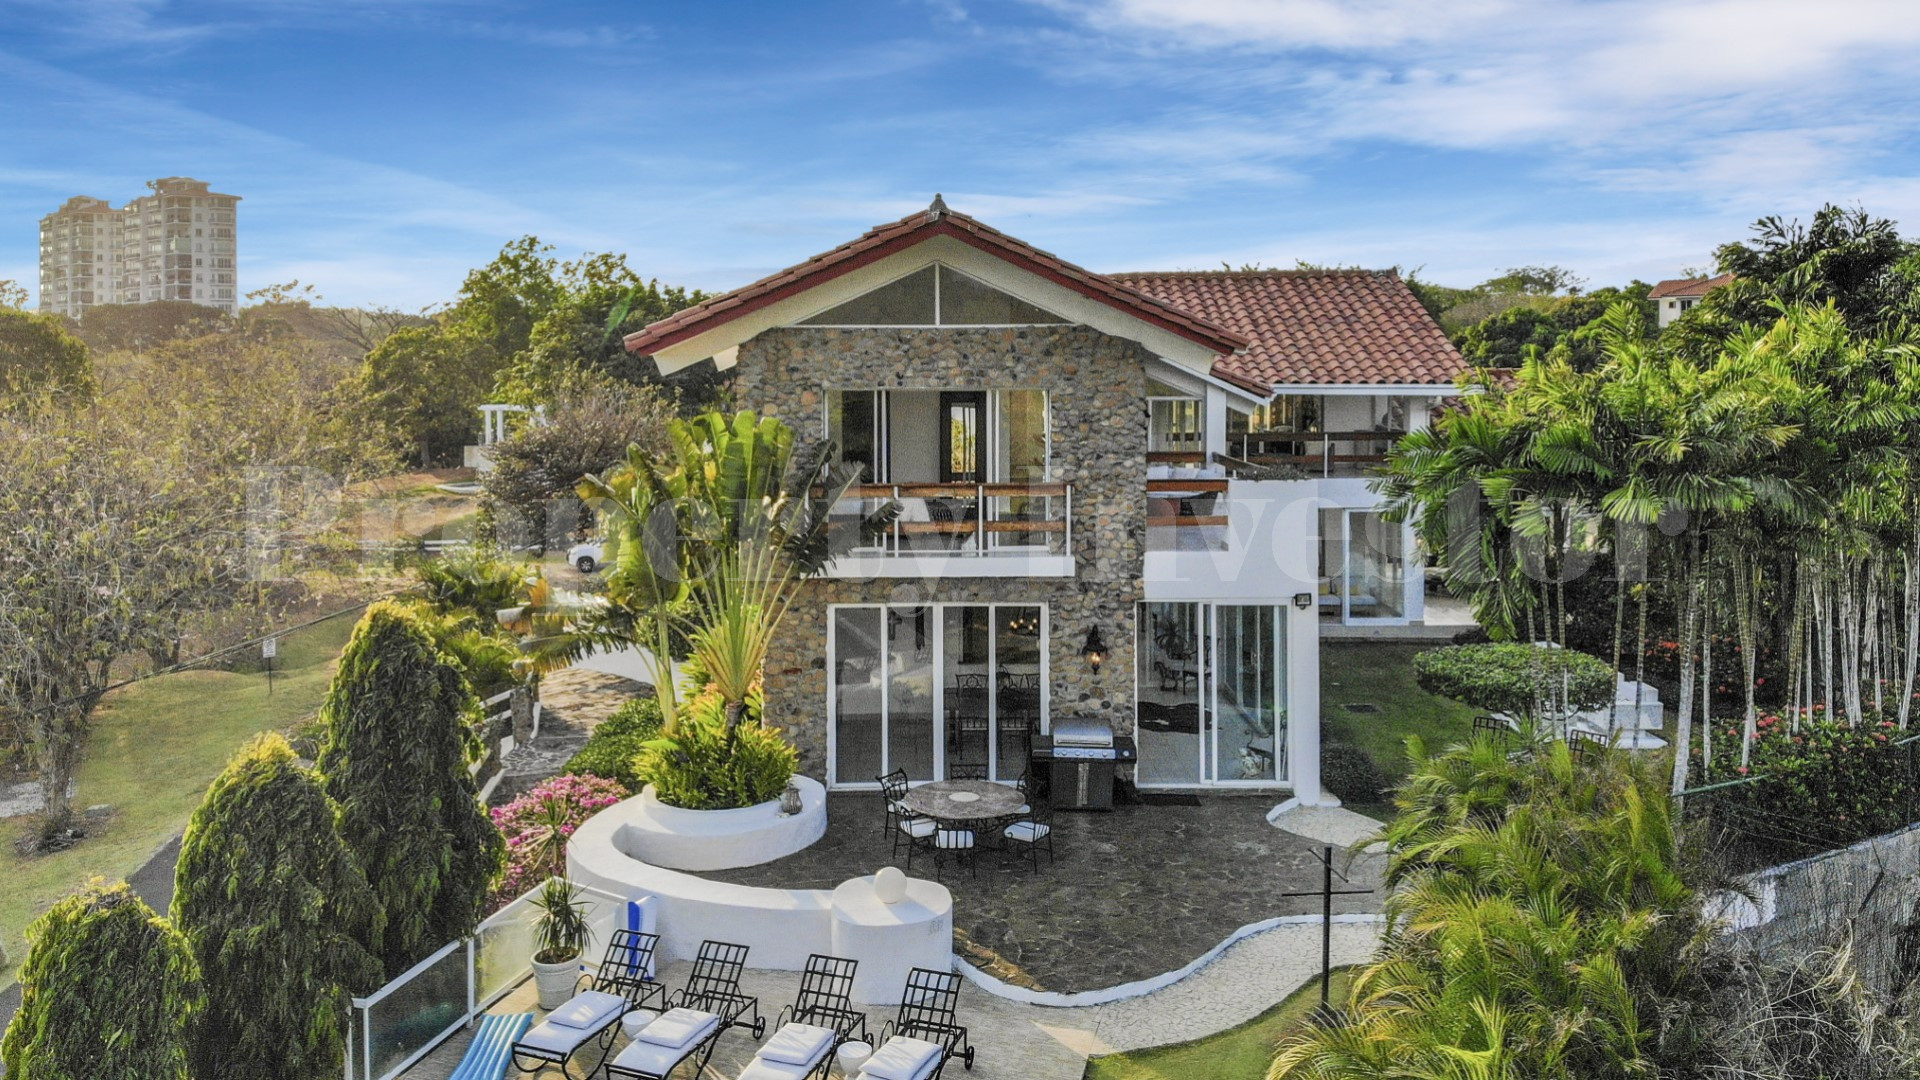 One-of-a-Kind 4 Bedroom Luxury Designer Villa for Sale in Punta Barco, Panama